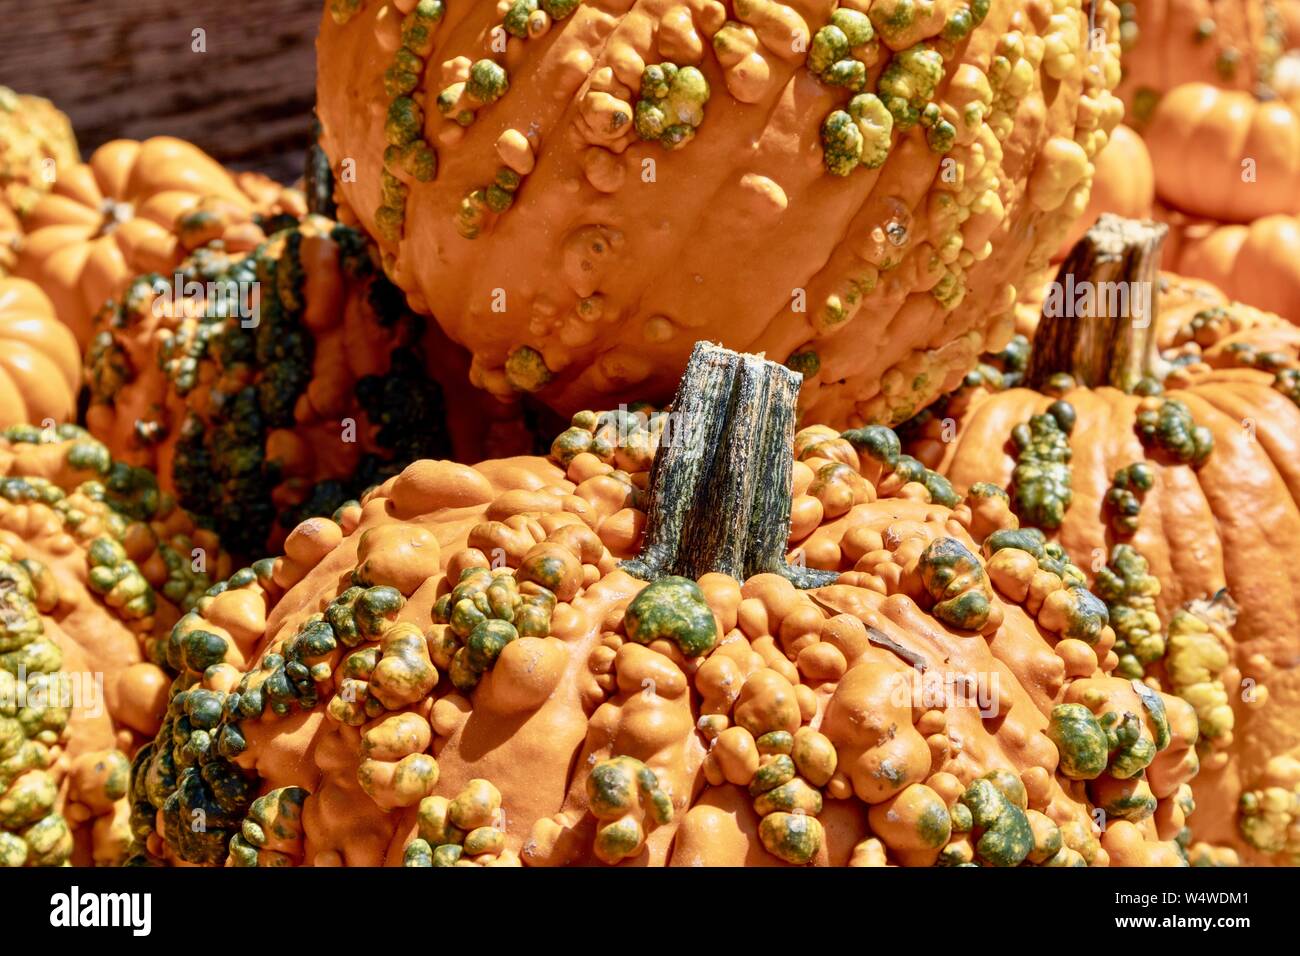 Pumpkins with warts Stock Photo